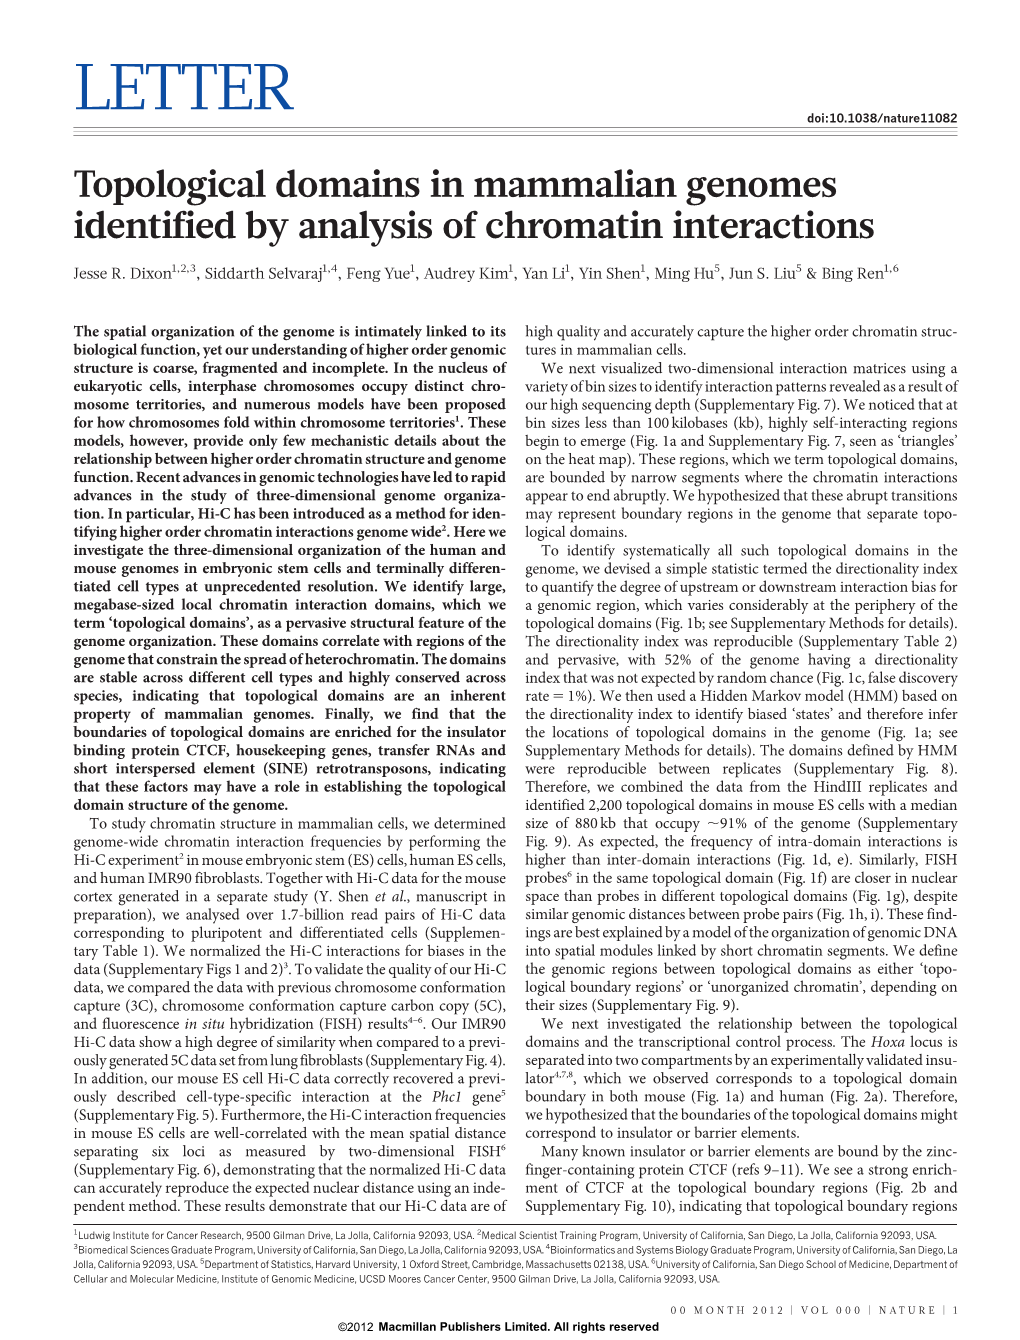 Topological Domains in Mammalian Genomes Identified by Analysis of Chromatin Interactions